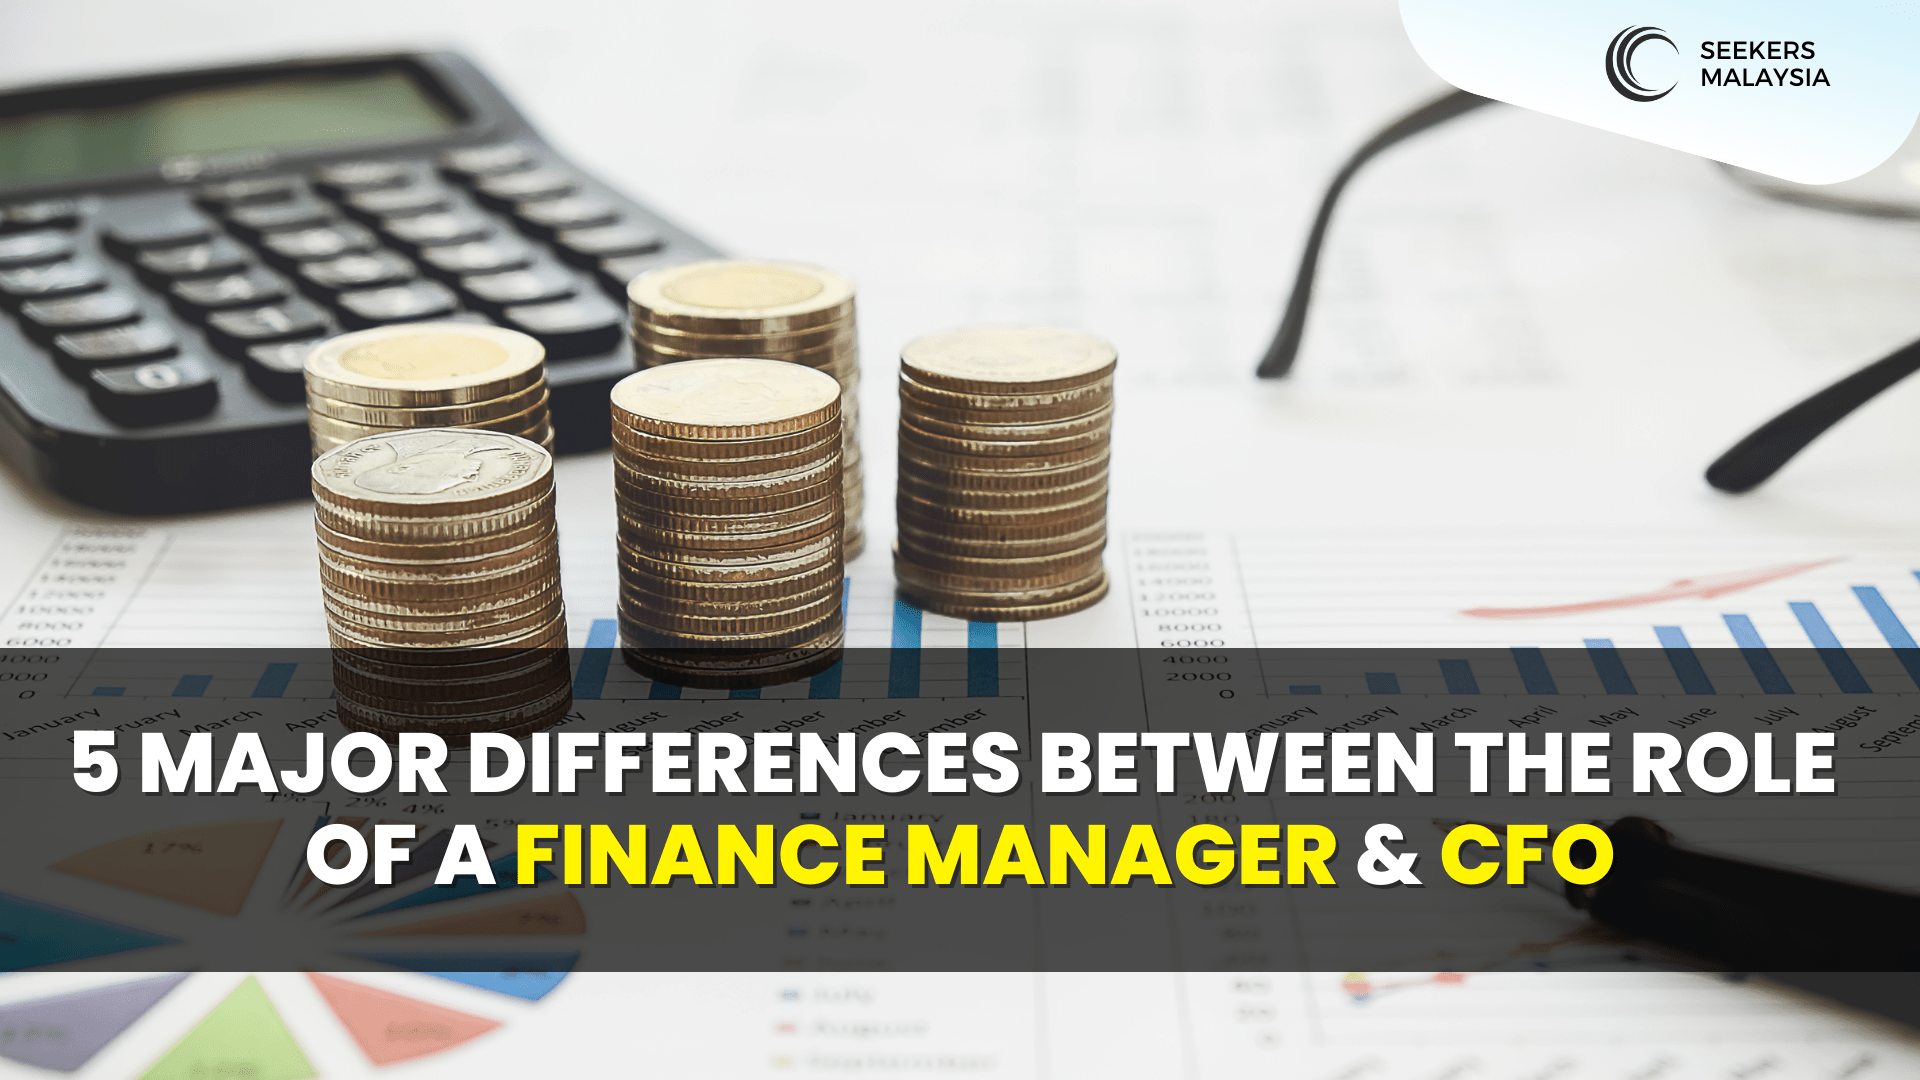 5 Major Differences Between the Role of a Finance Manager & CFO